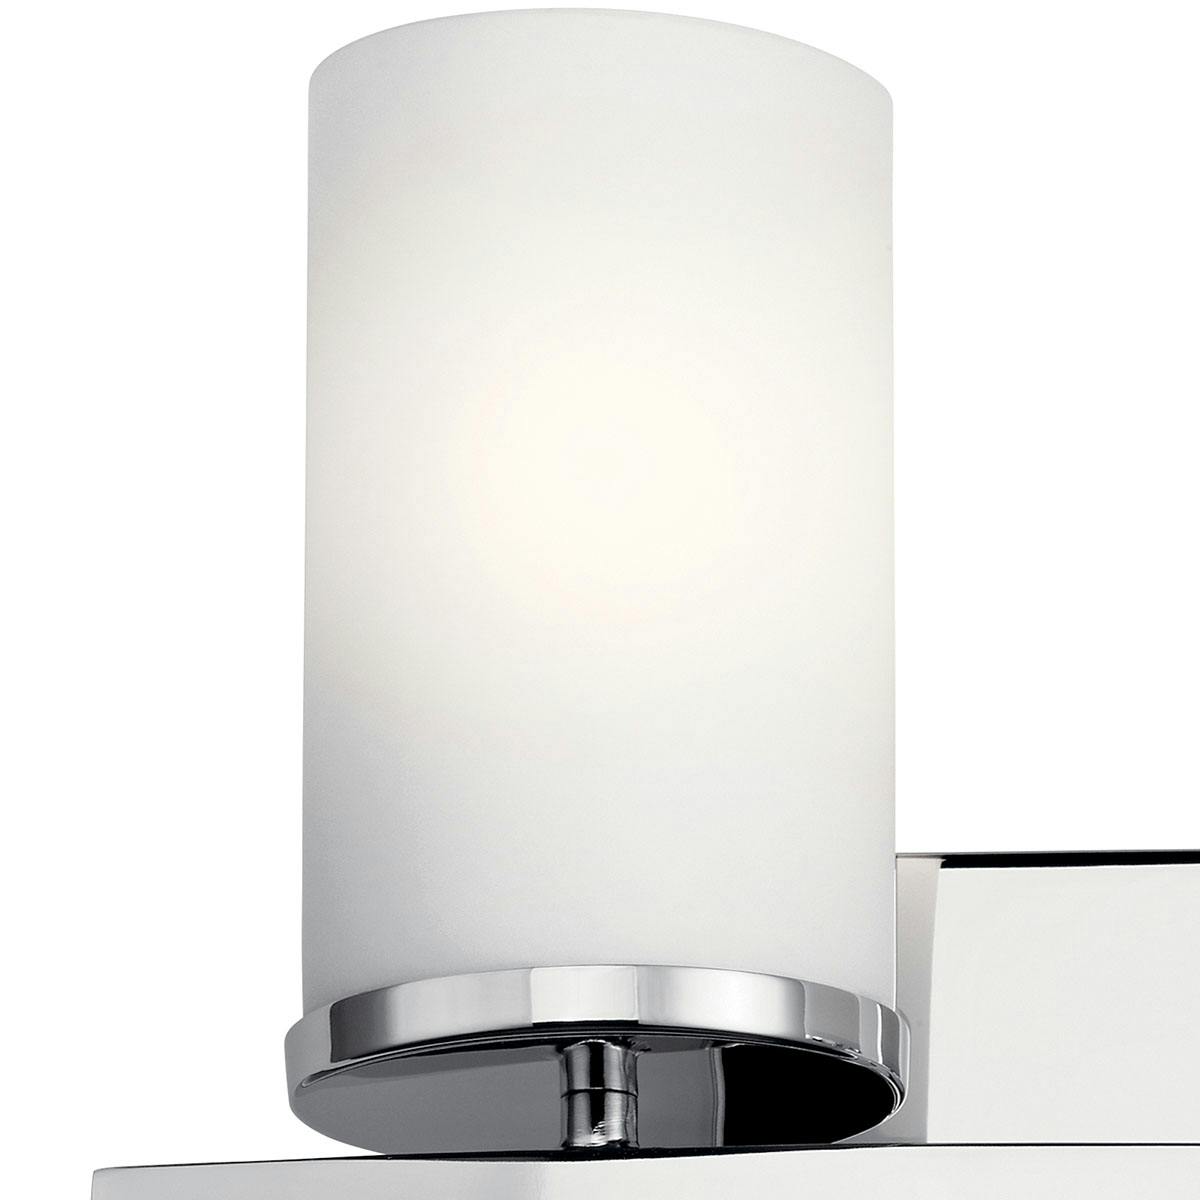 Close up view of the Crosby 2 Light Bath Light Chrome on a white background